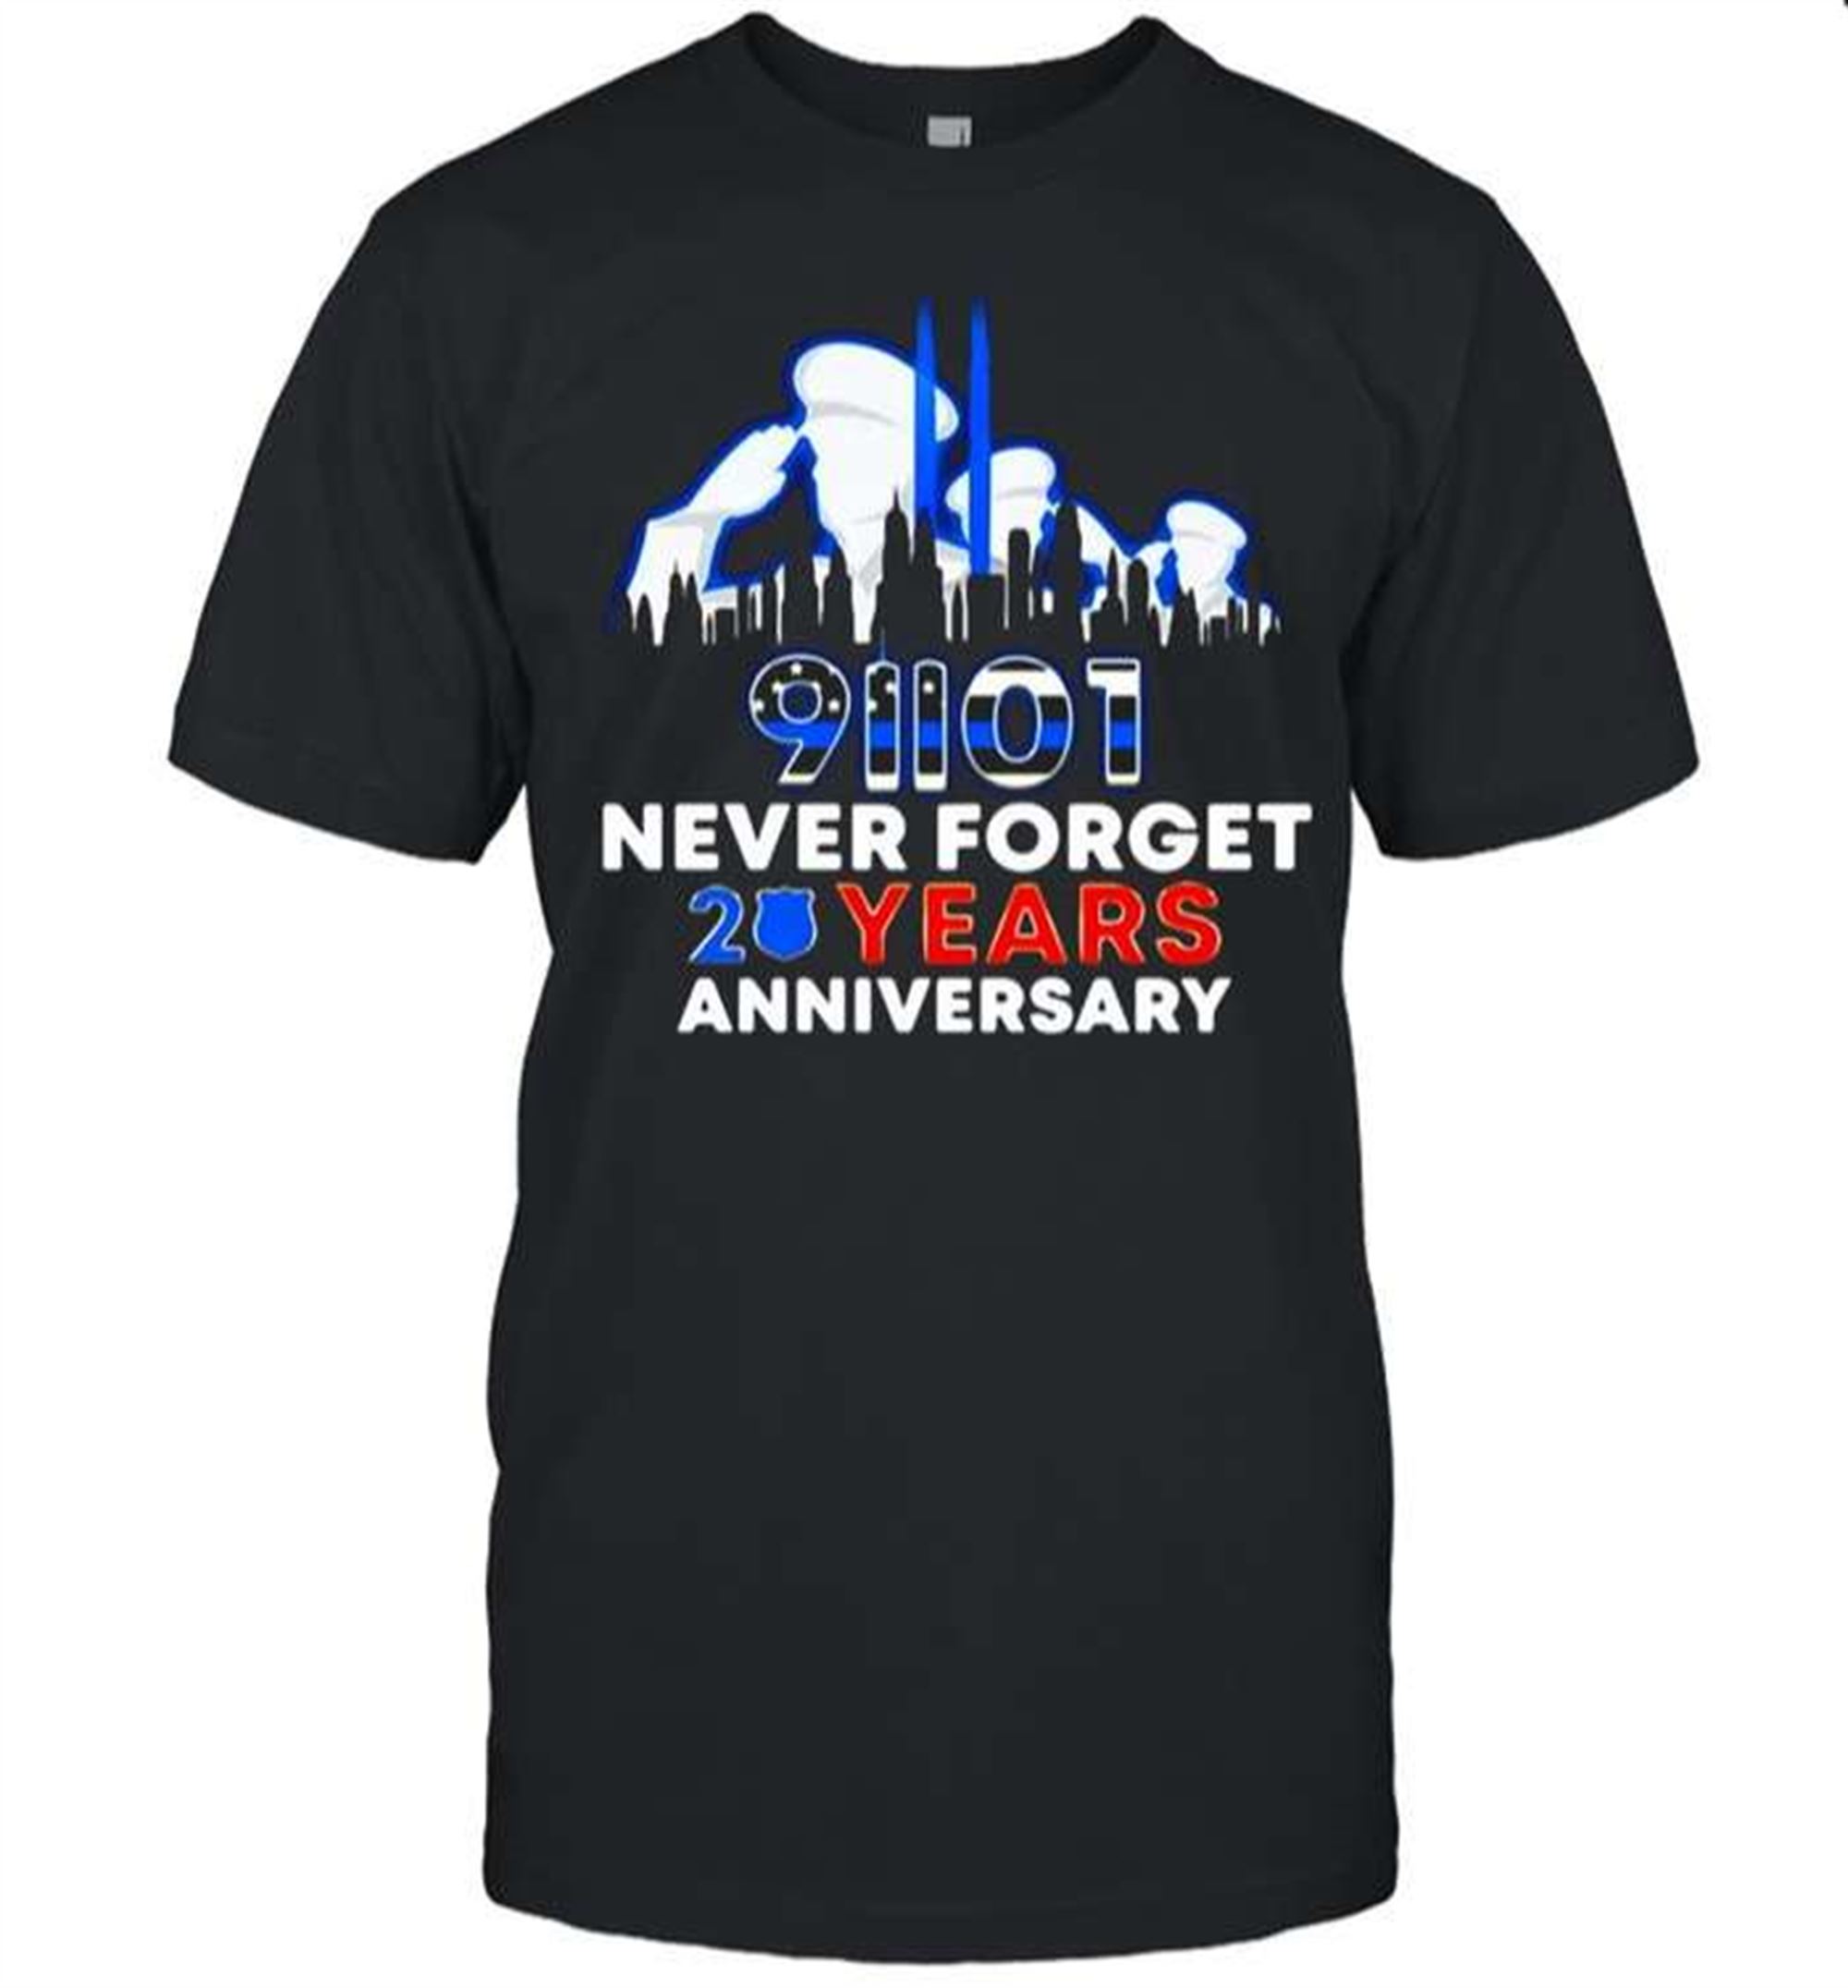 Police Never Forget 9 11 20th Anniversary T-shirt Full Size Up To 5xl